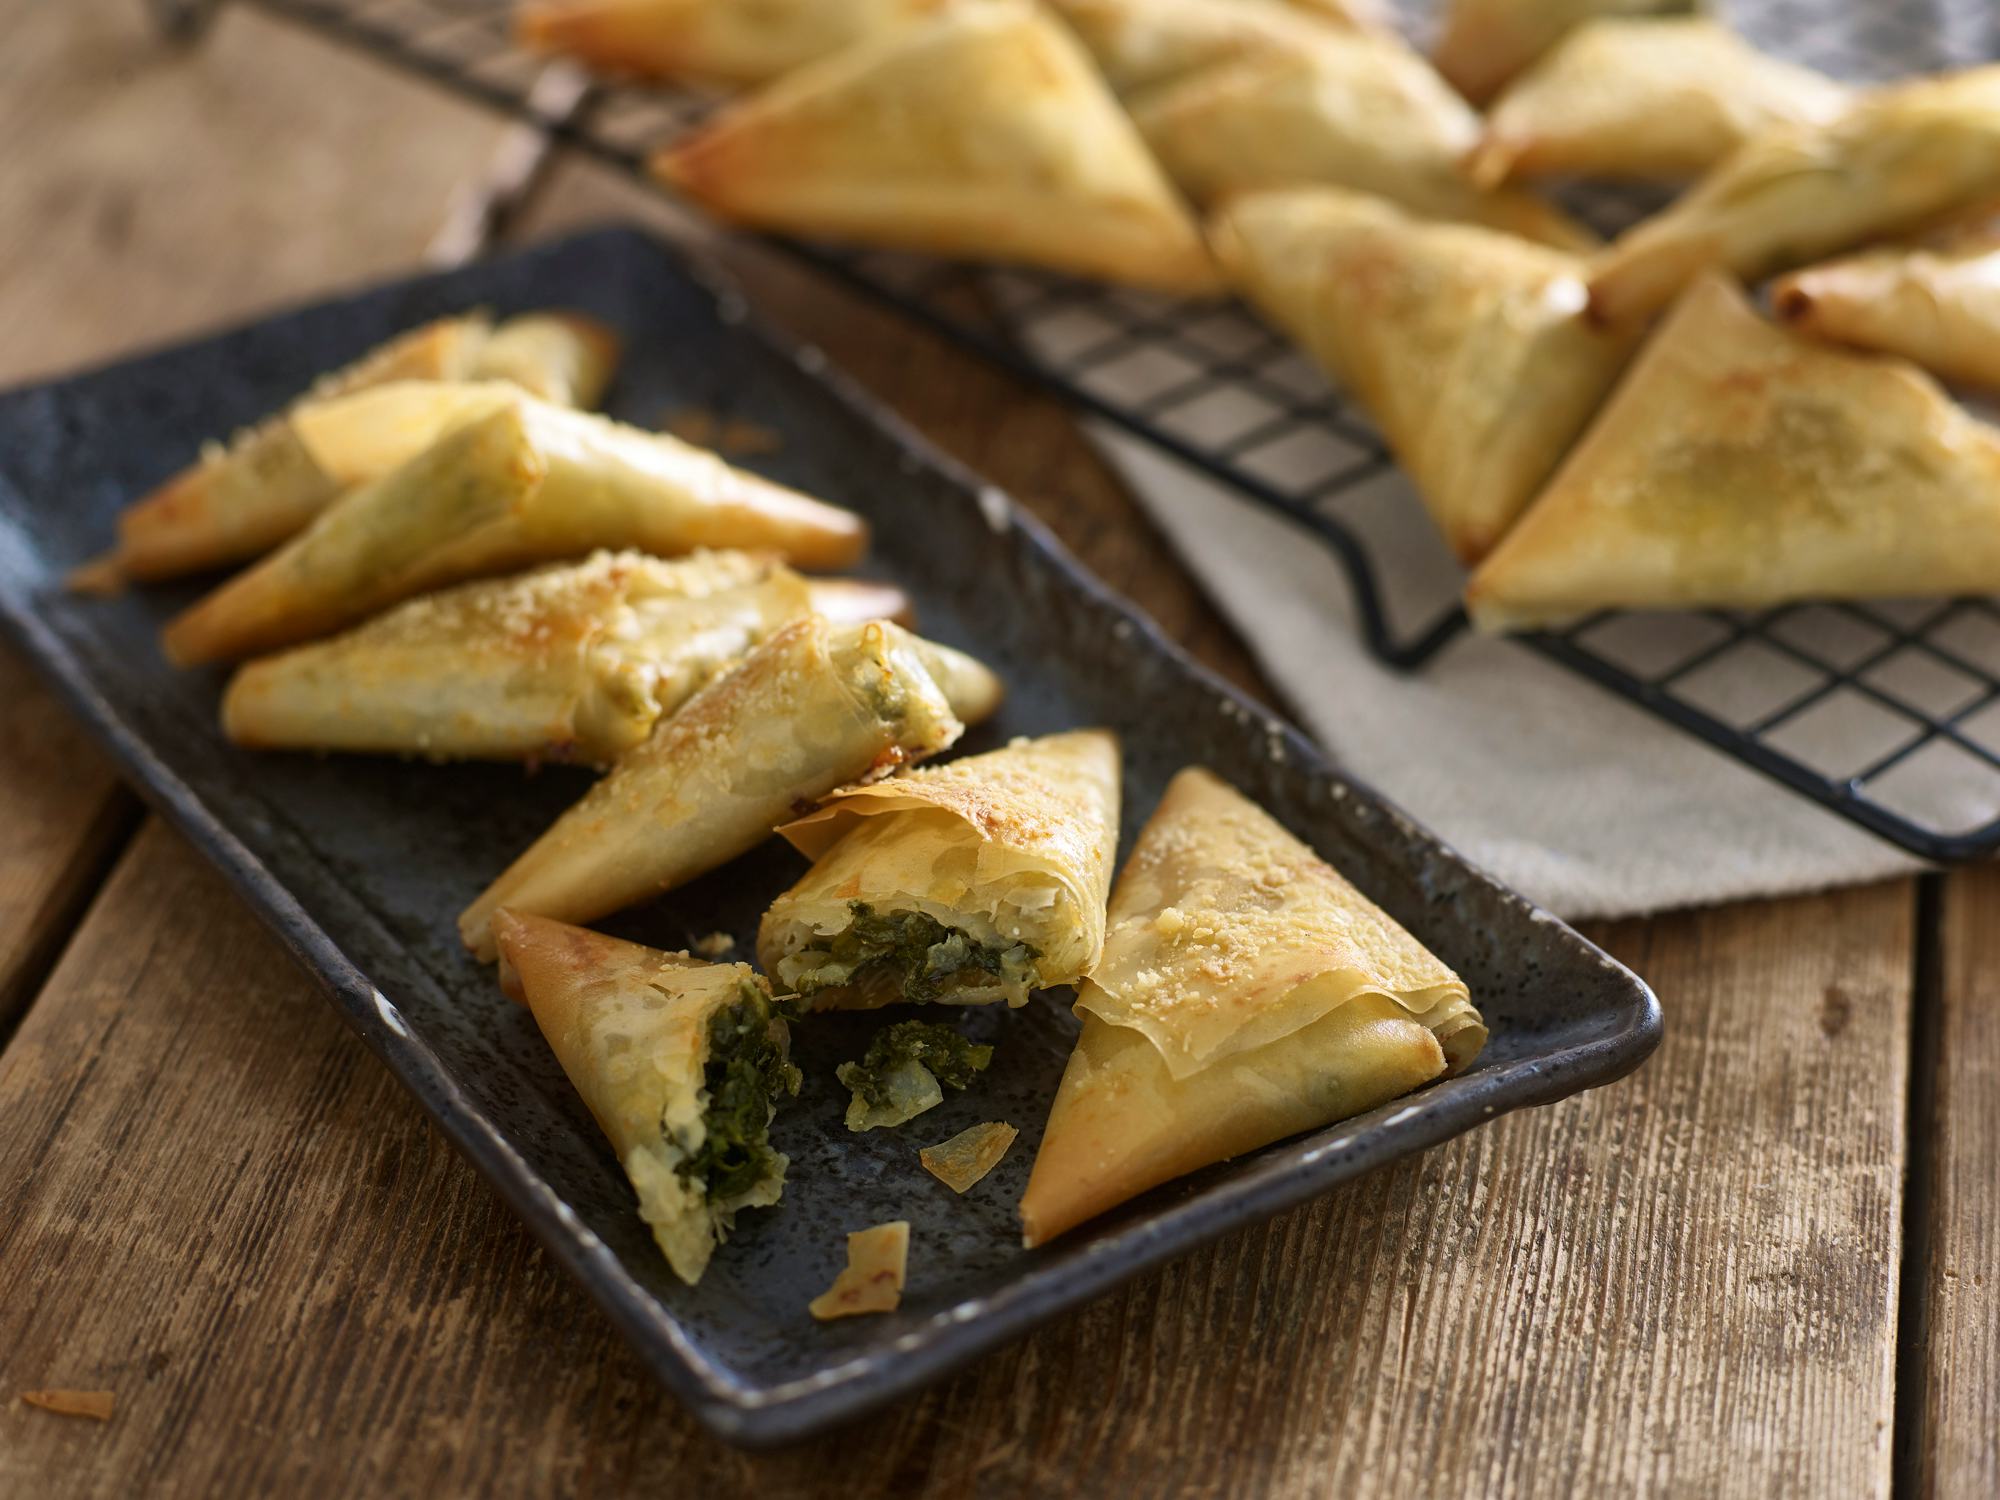 Parmigiano Reggiano spinach and ricotta parcels